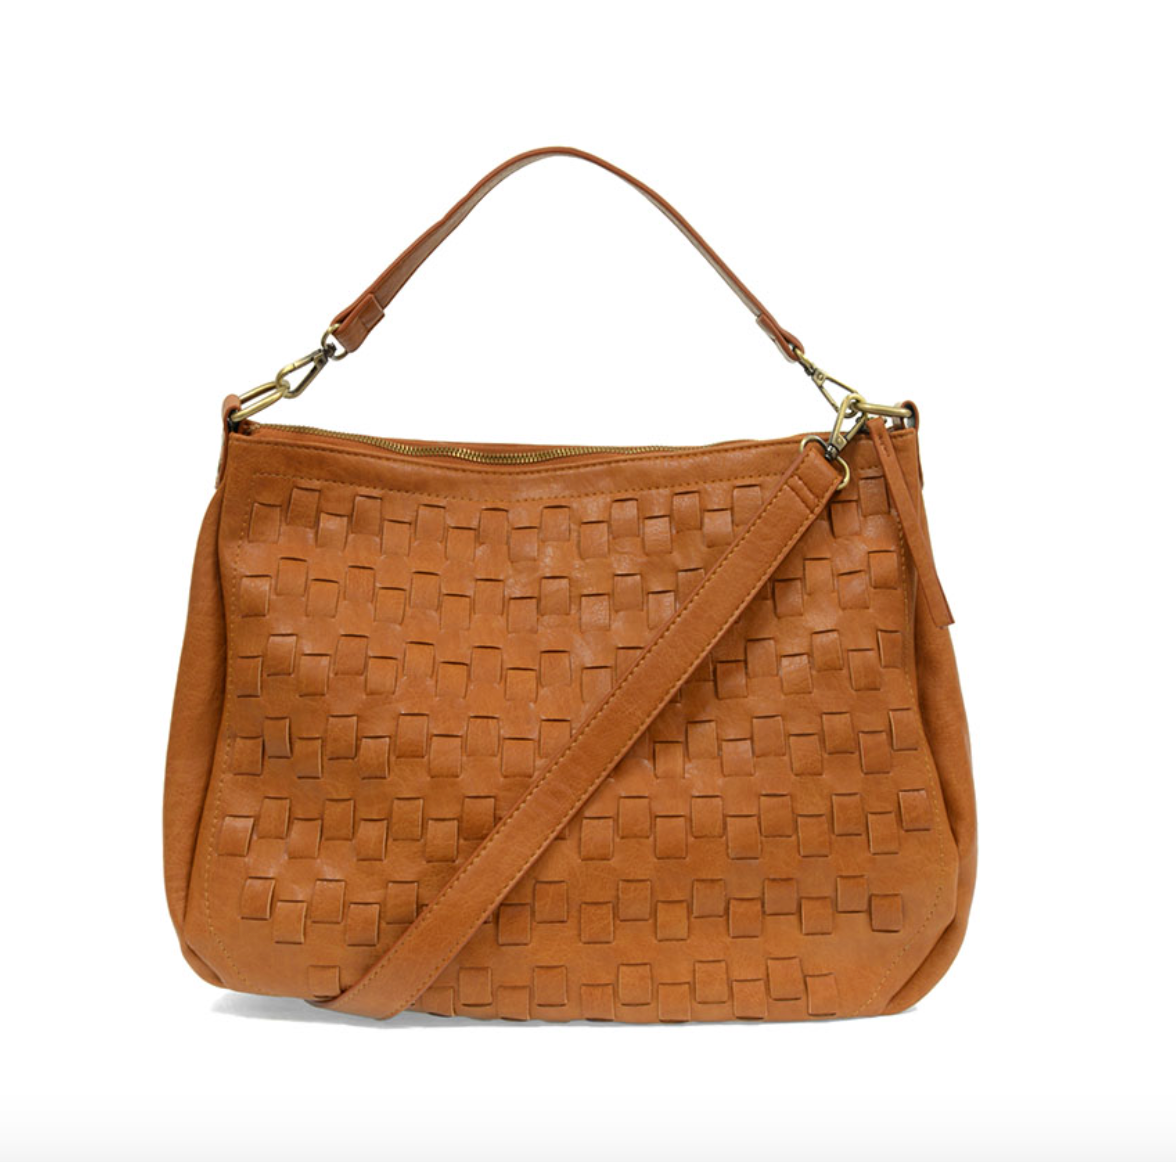 Slouchy Woven Look Clutch